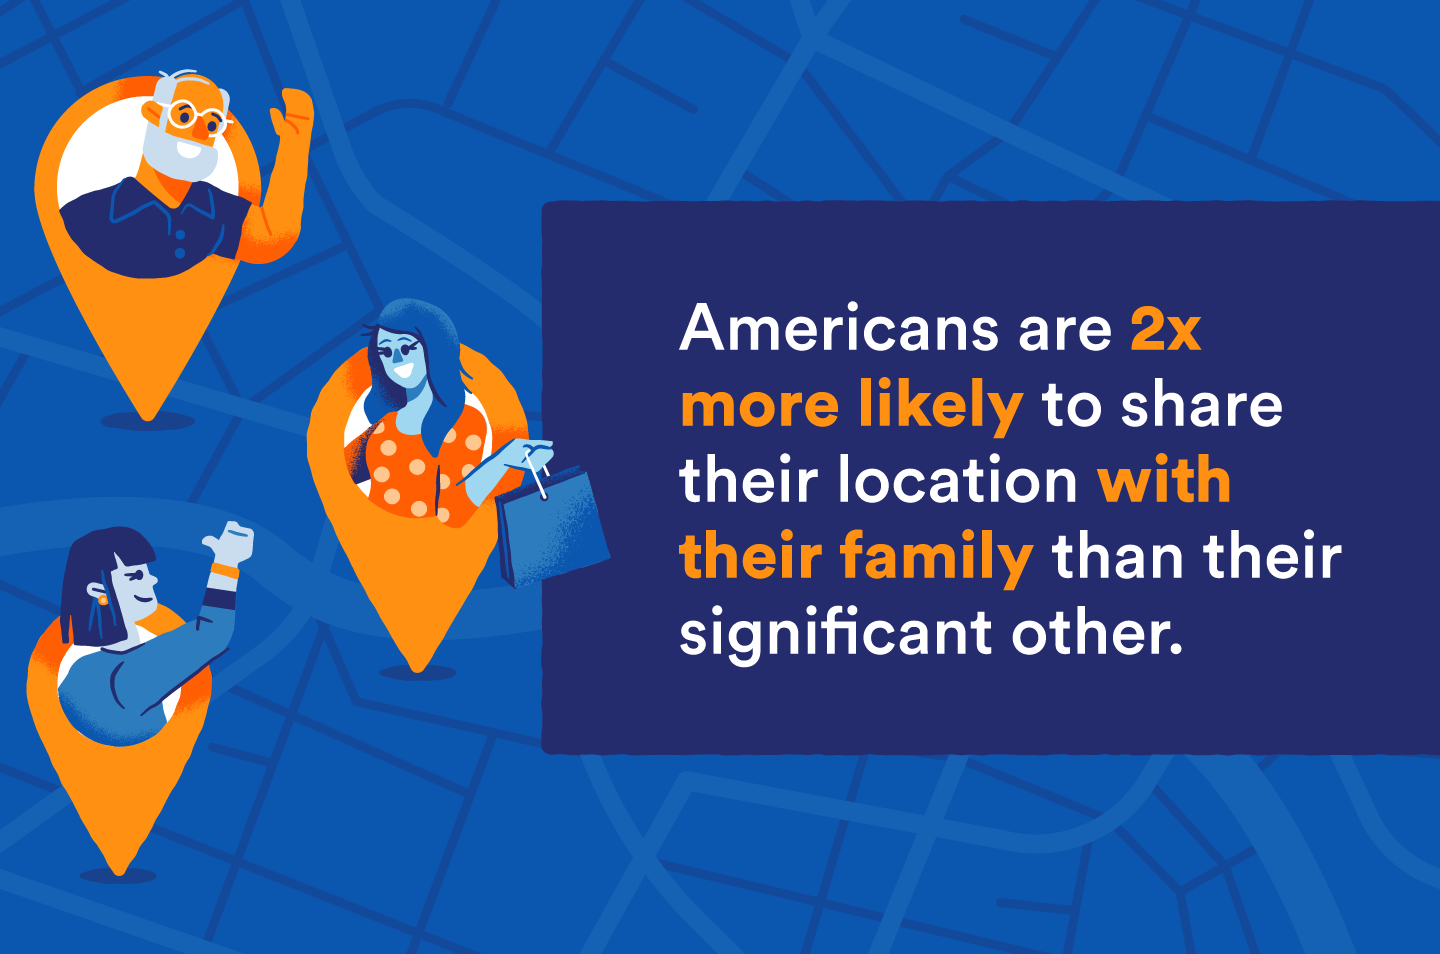 graphic showing that people are more likely to share their location with friends and family